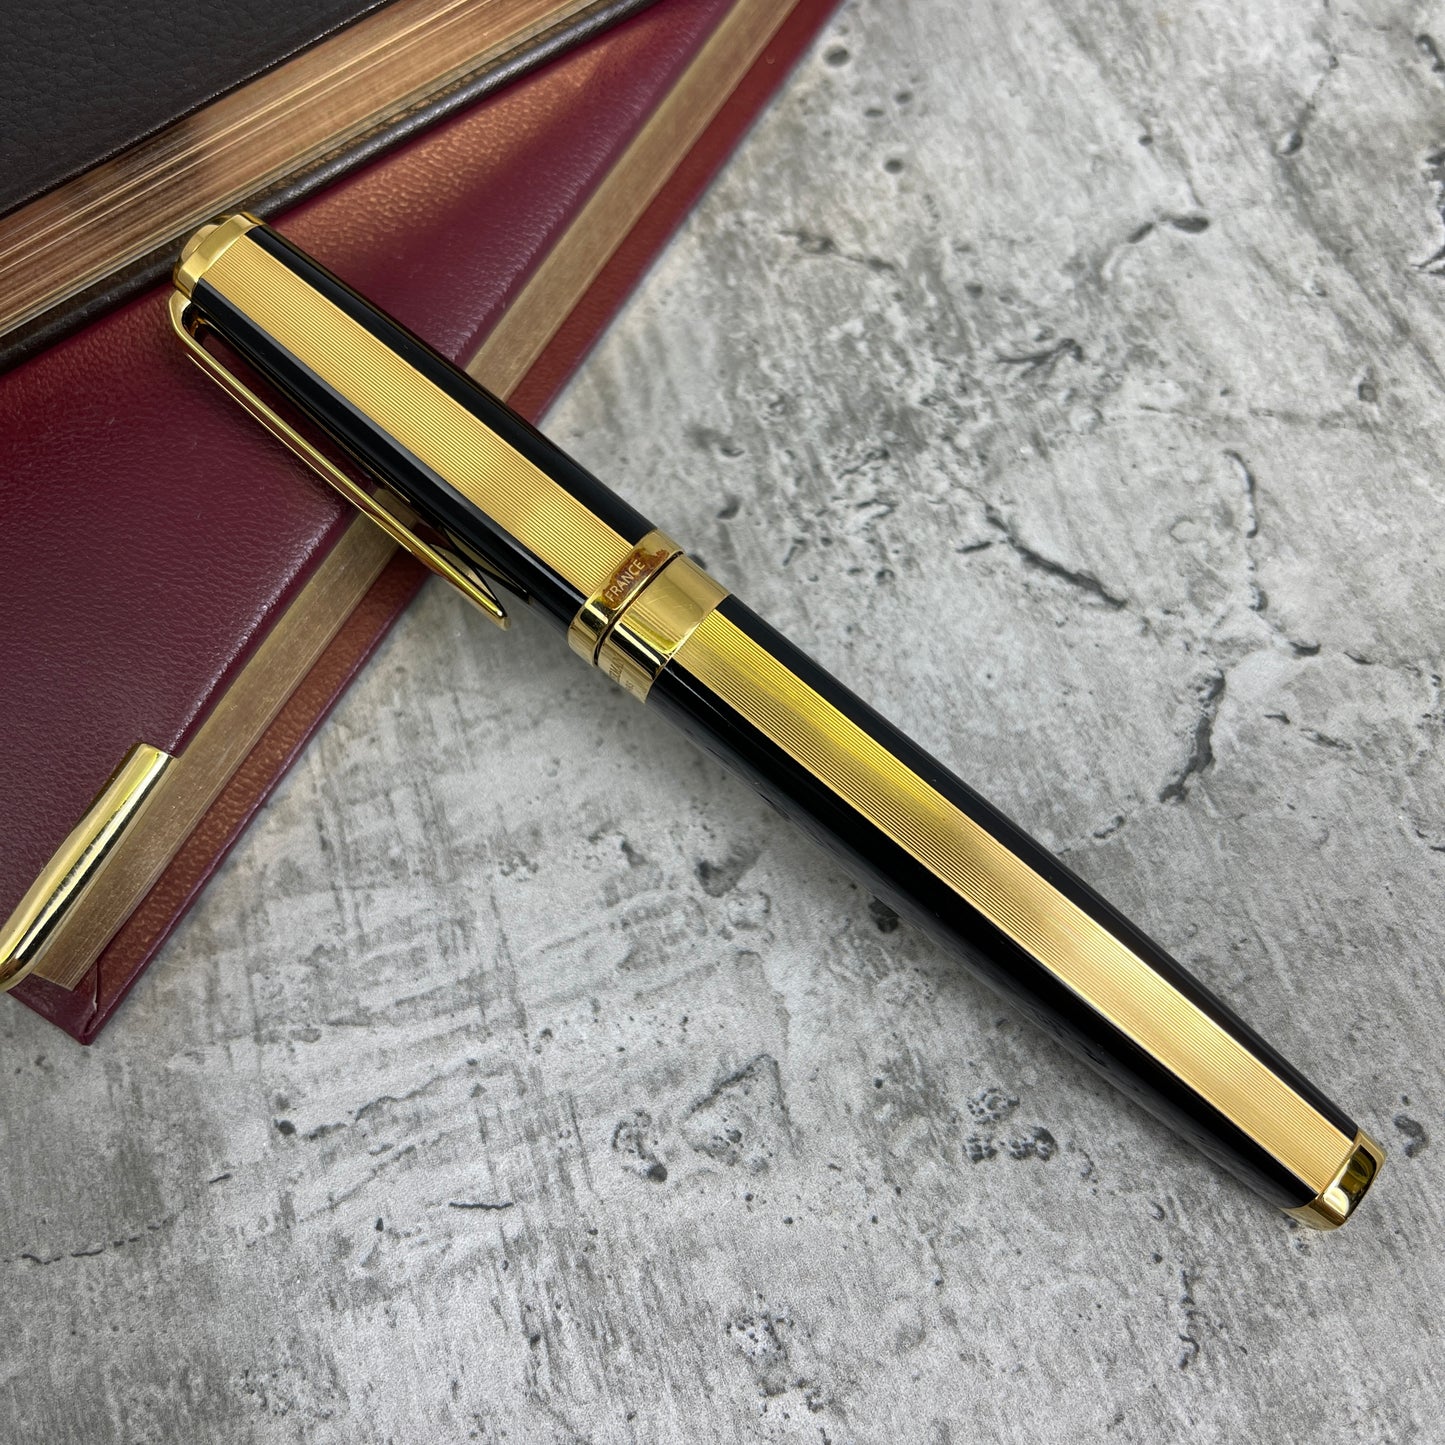 Pre-Owned Waterman Day & Night Rollerball